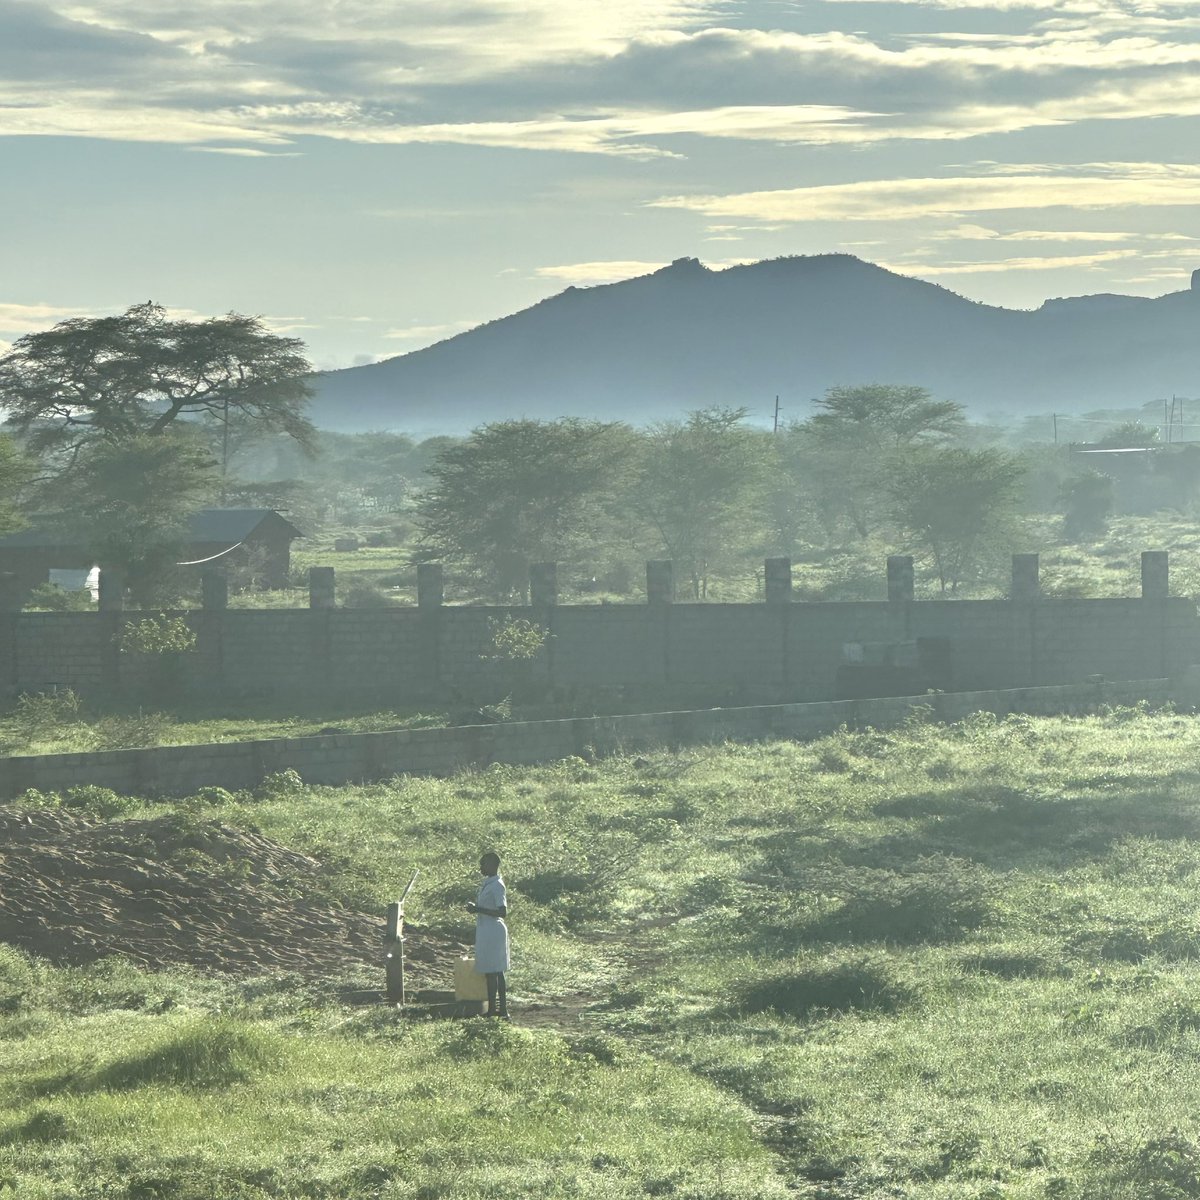 A room with a view. Good morning from Moroto, Karamoja! ☀️#PearlOfAfrica